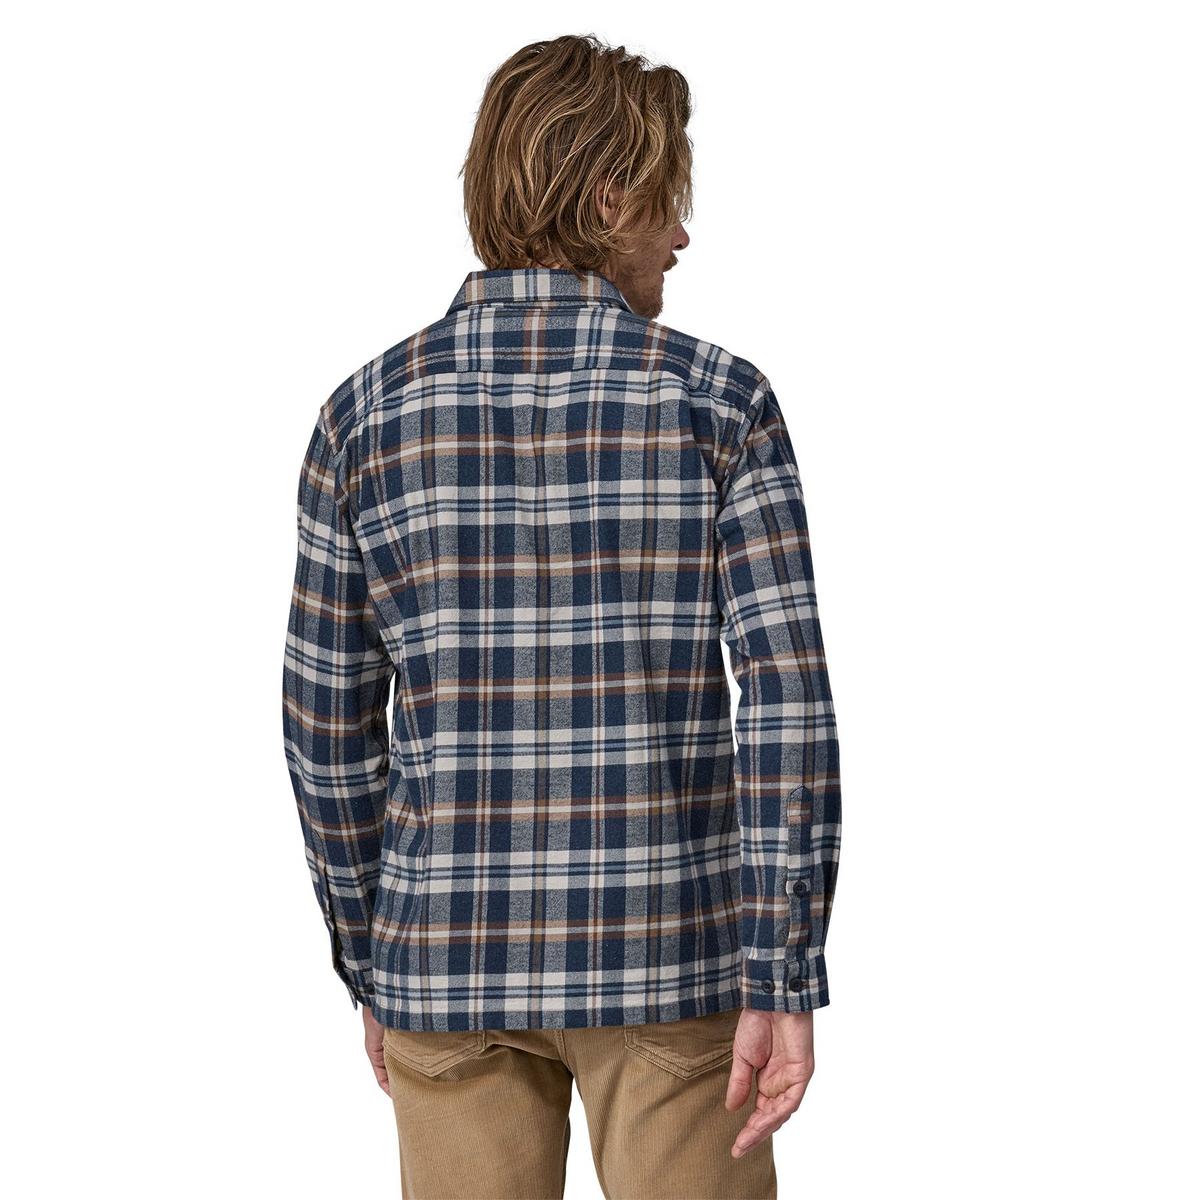 Patagonia Men's Long-Sleeved Cotton Flannel Shirt - Fields / New Navy